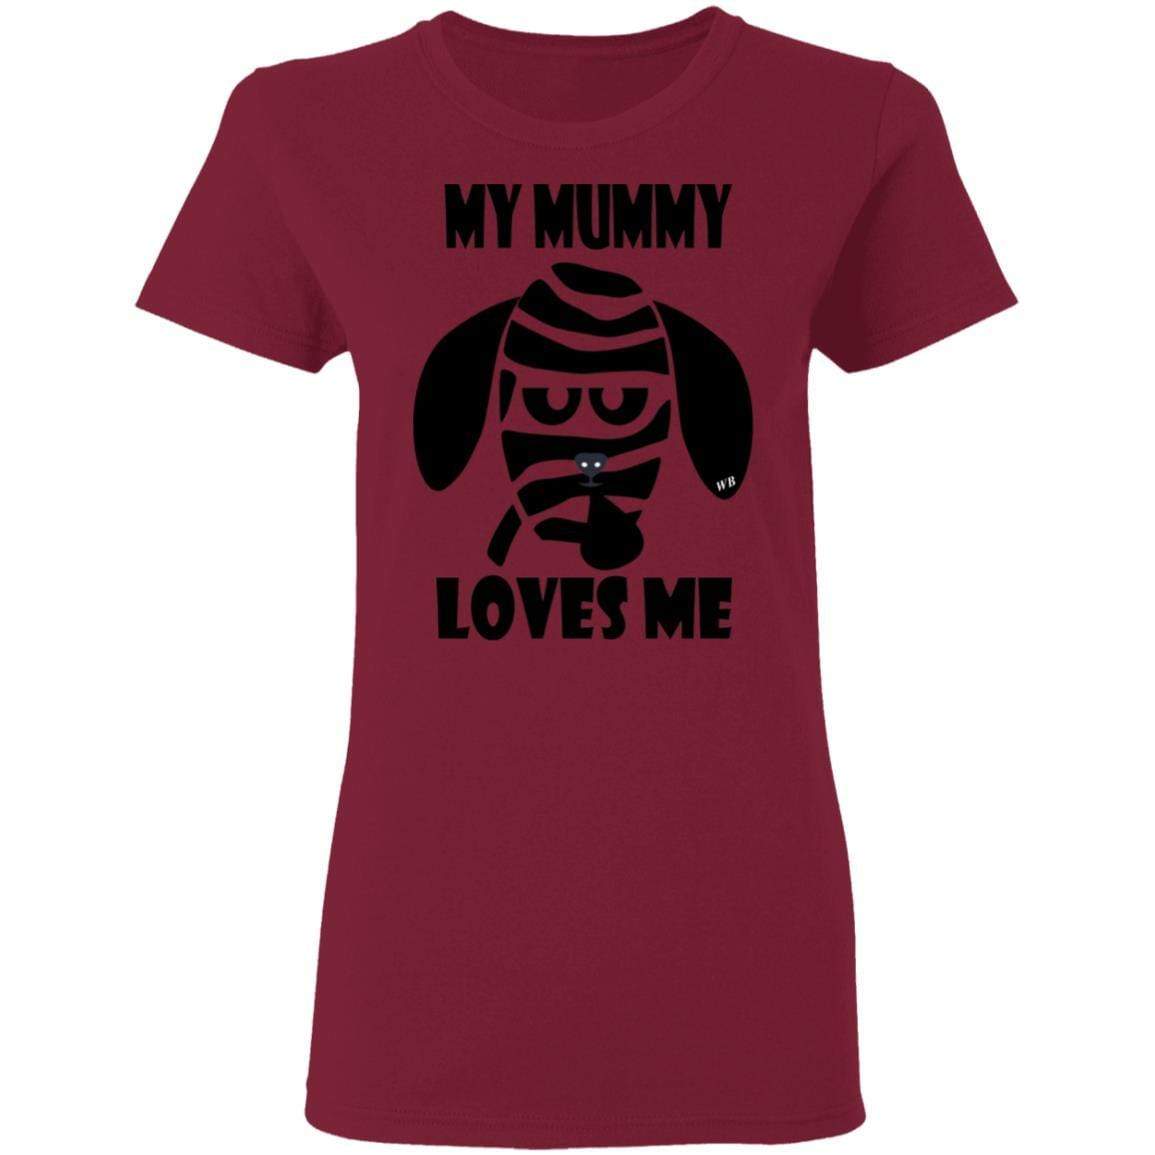 T-Shirts Cardinal Red / S WineyBitches.Co "My Mummy Loves Me" Halloween Collection Ladies' 5.3 oz. T-Shirt WineyBitchesCo